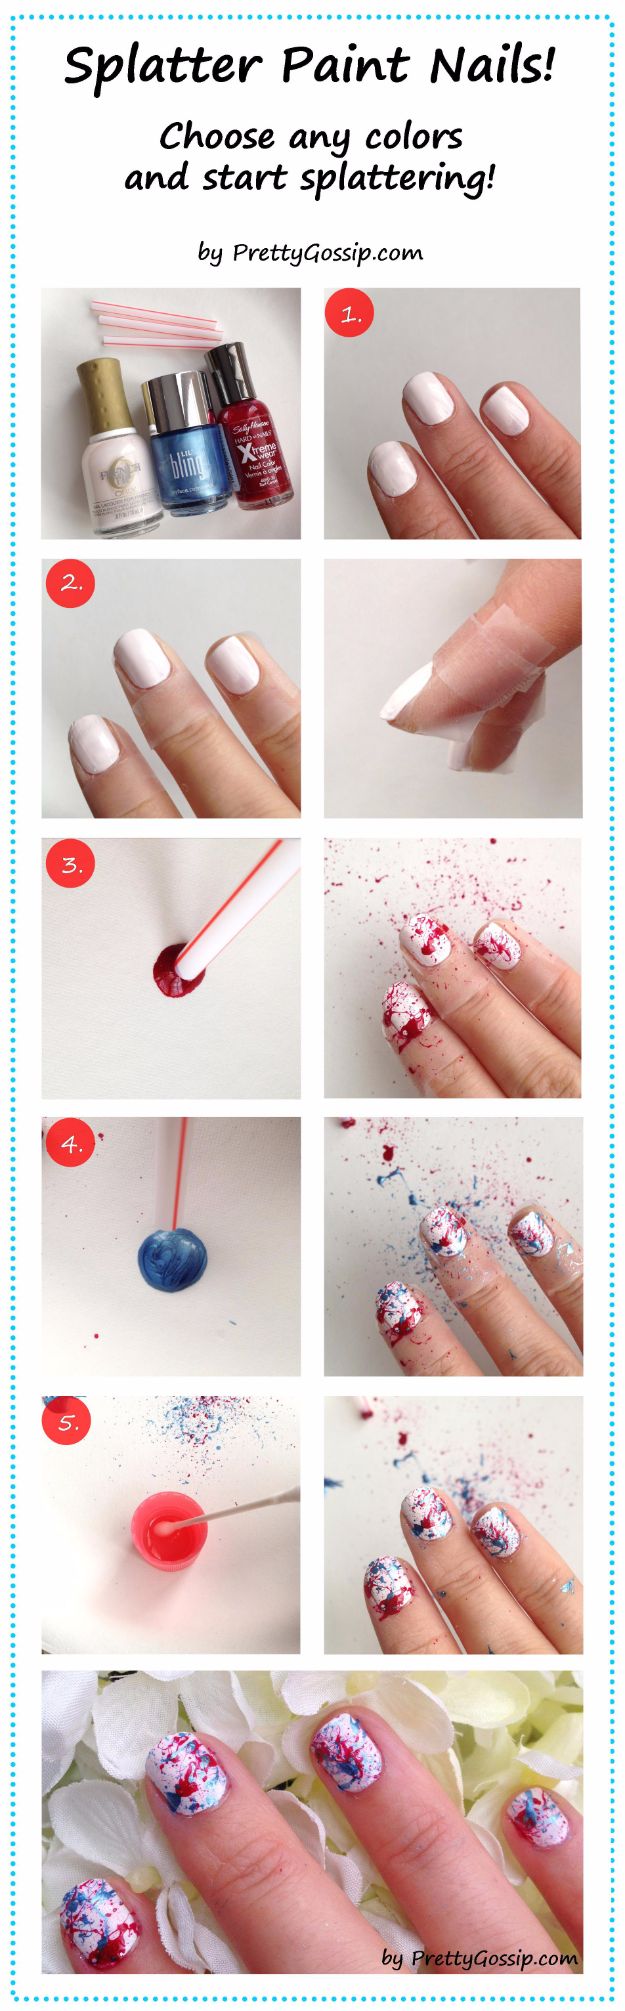 Easy Ways to Paint Nails - Splatter Paint Nails - Quick Tips and Tricks for Manicures at Home - Nail Designs and Art Ideas for Simple DIY Pedicures and Manicure at Home - Hacks and Tutorials with Cool Step by Step Instructions and Tutorials - DIY Projects and Crafts by DIY JOY 